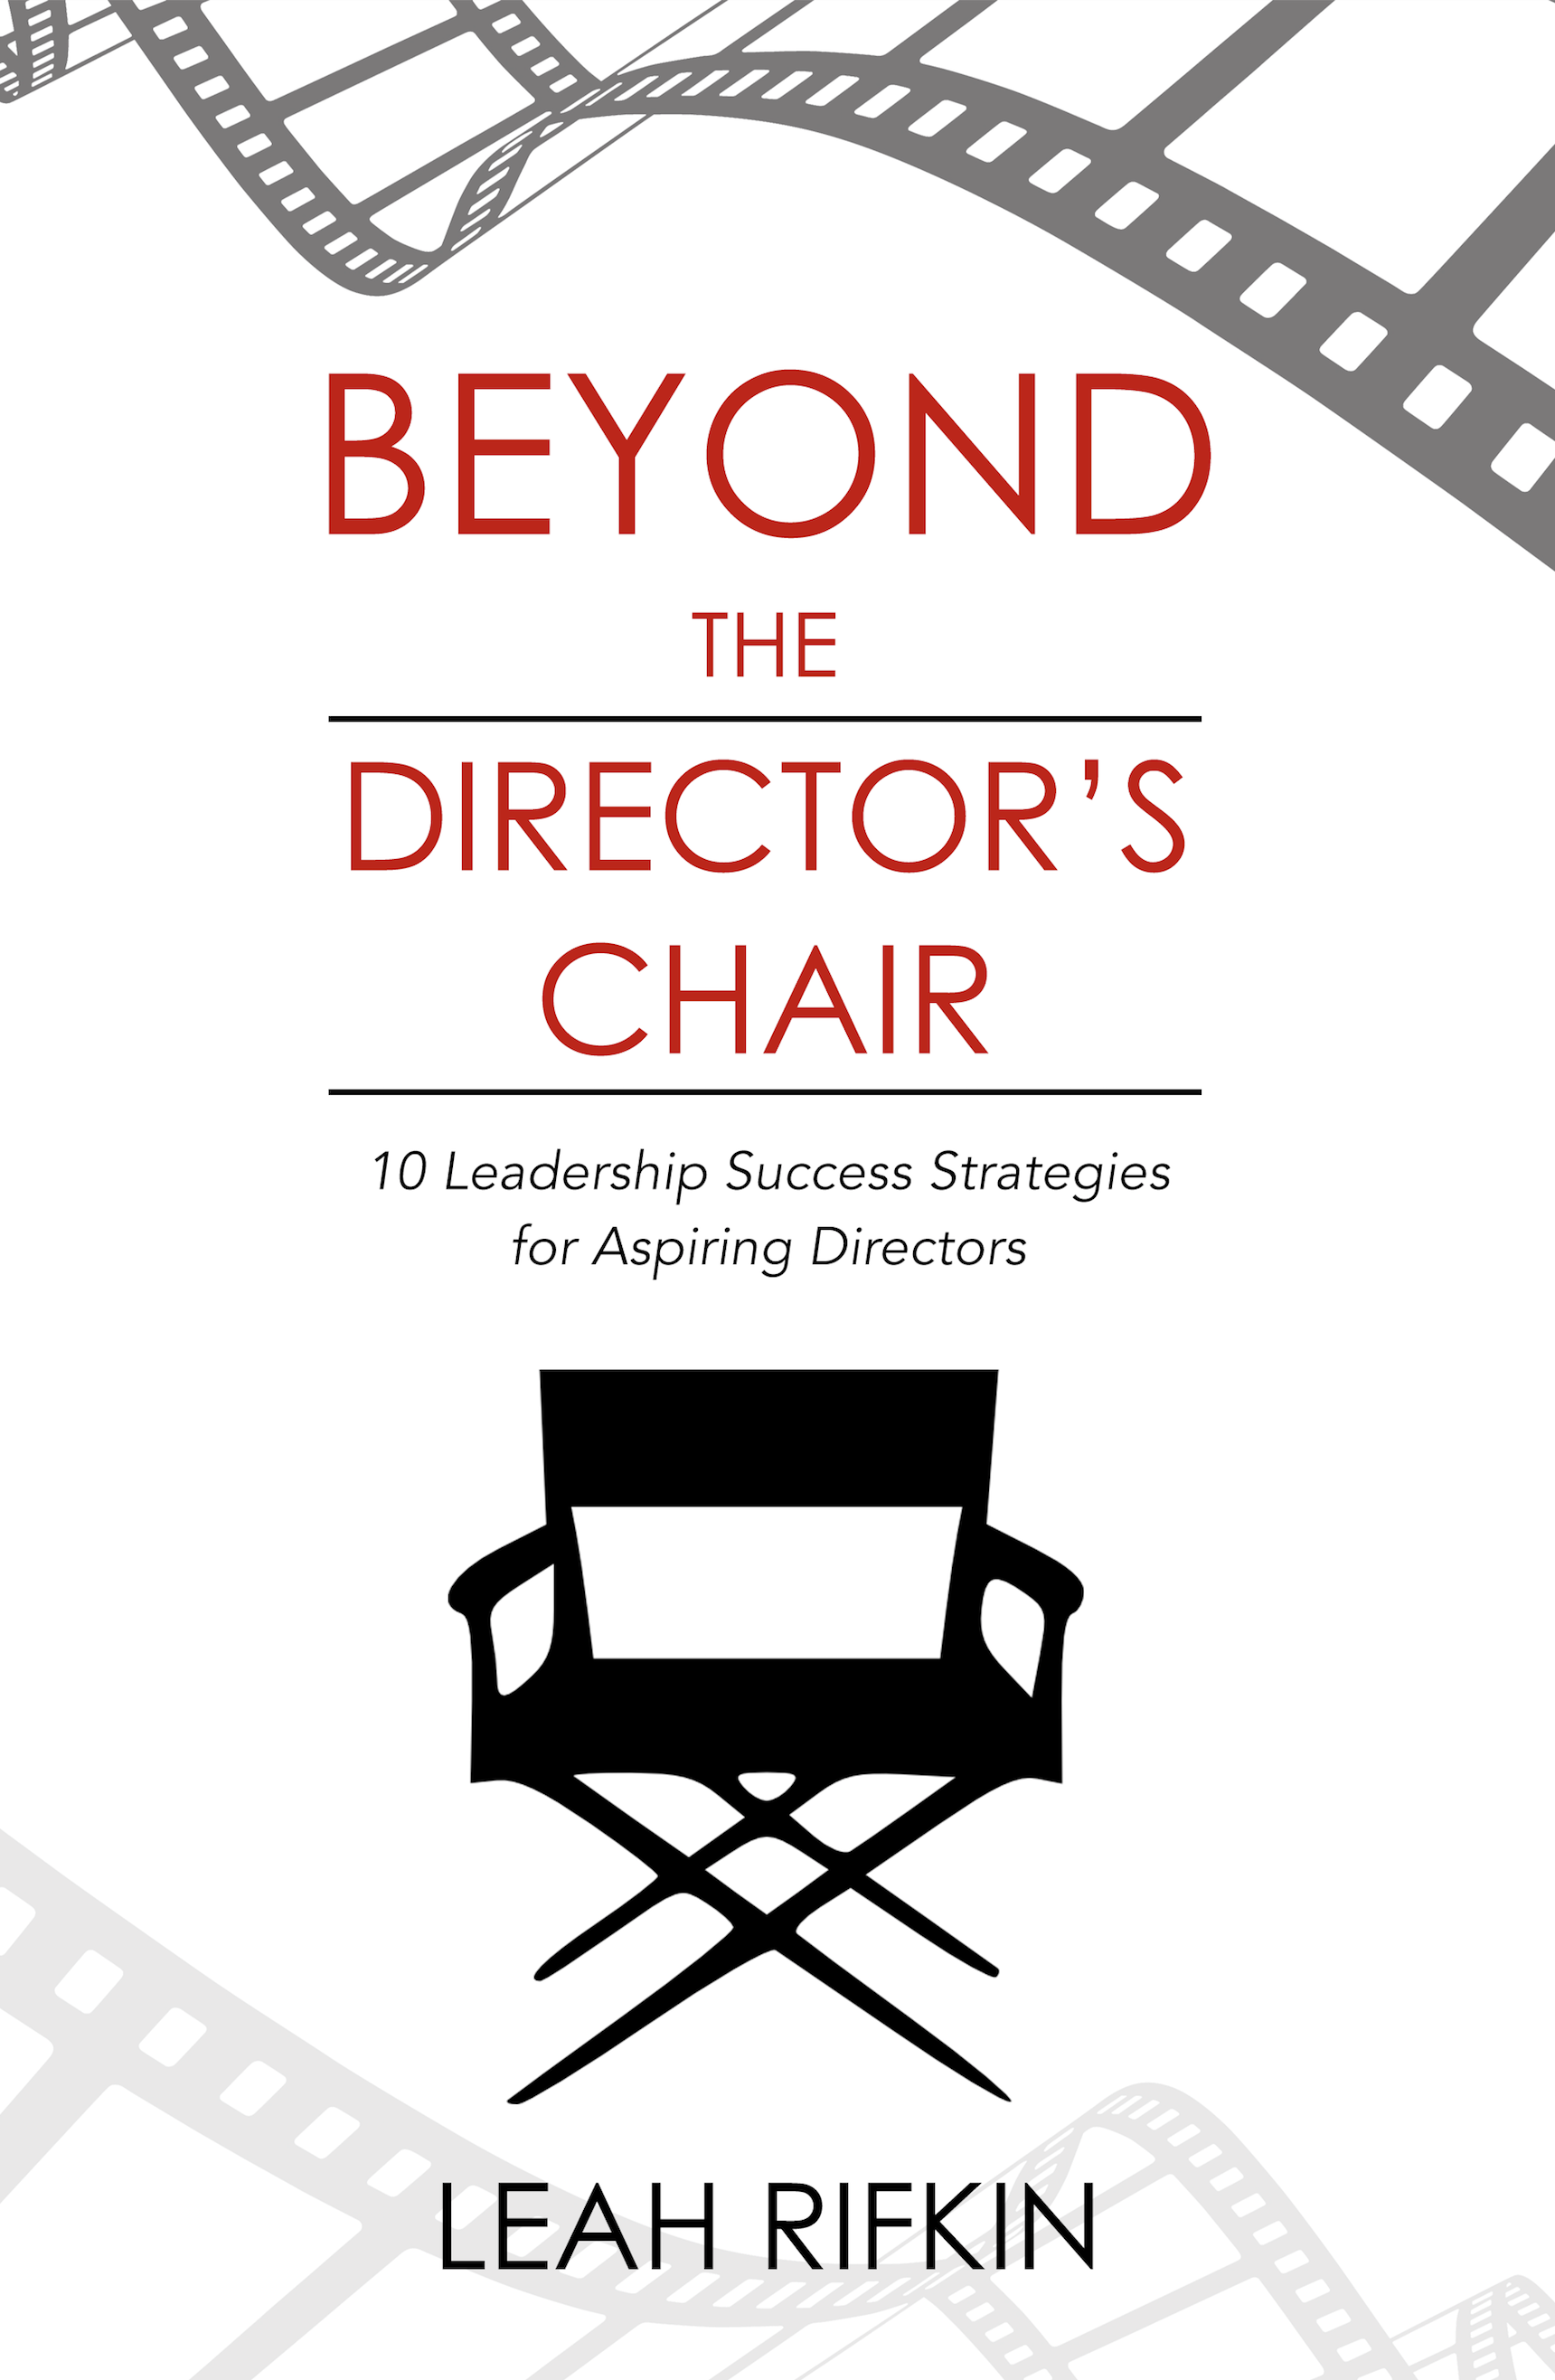 Book for directors who want to effectively tell commercial stories with soul